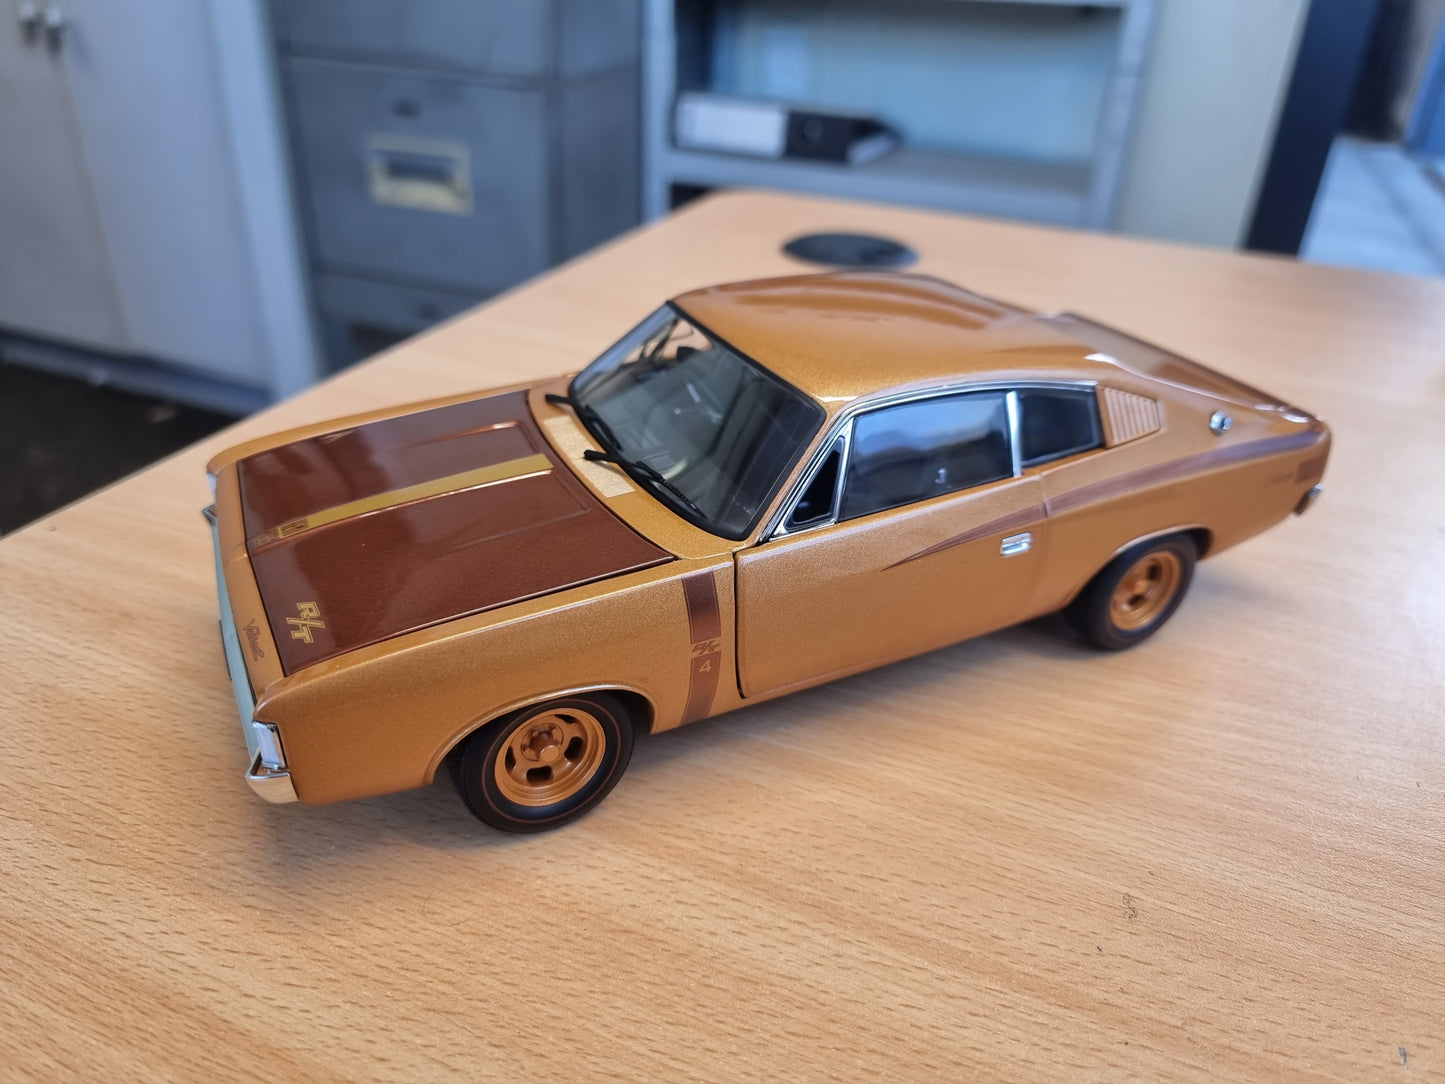 1/18 Valiant E49 50th Anniversary Gold Livery Charger